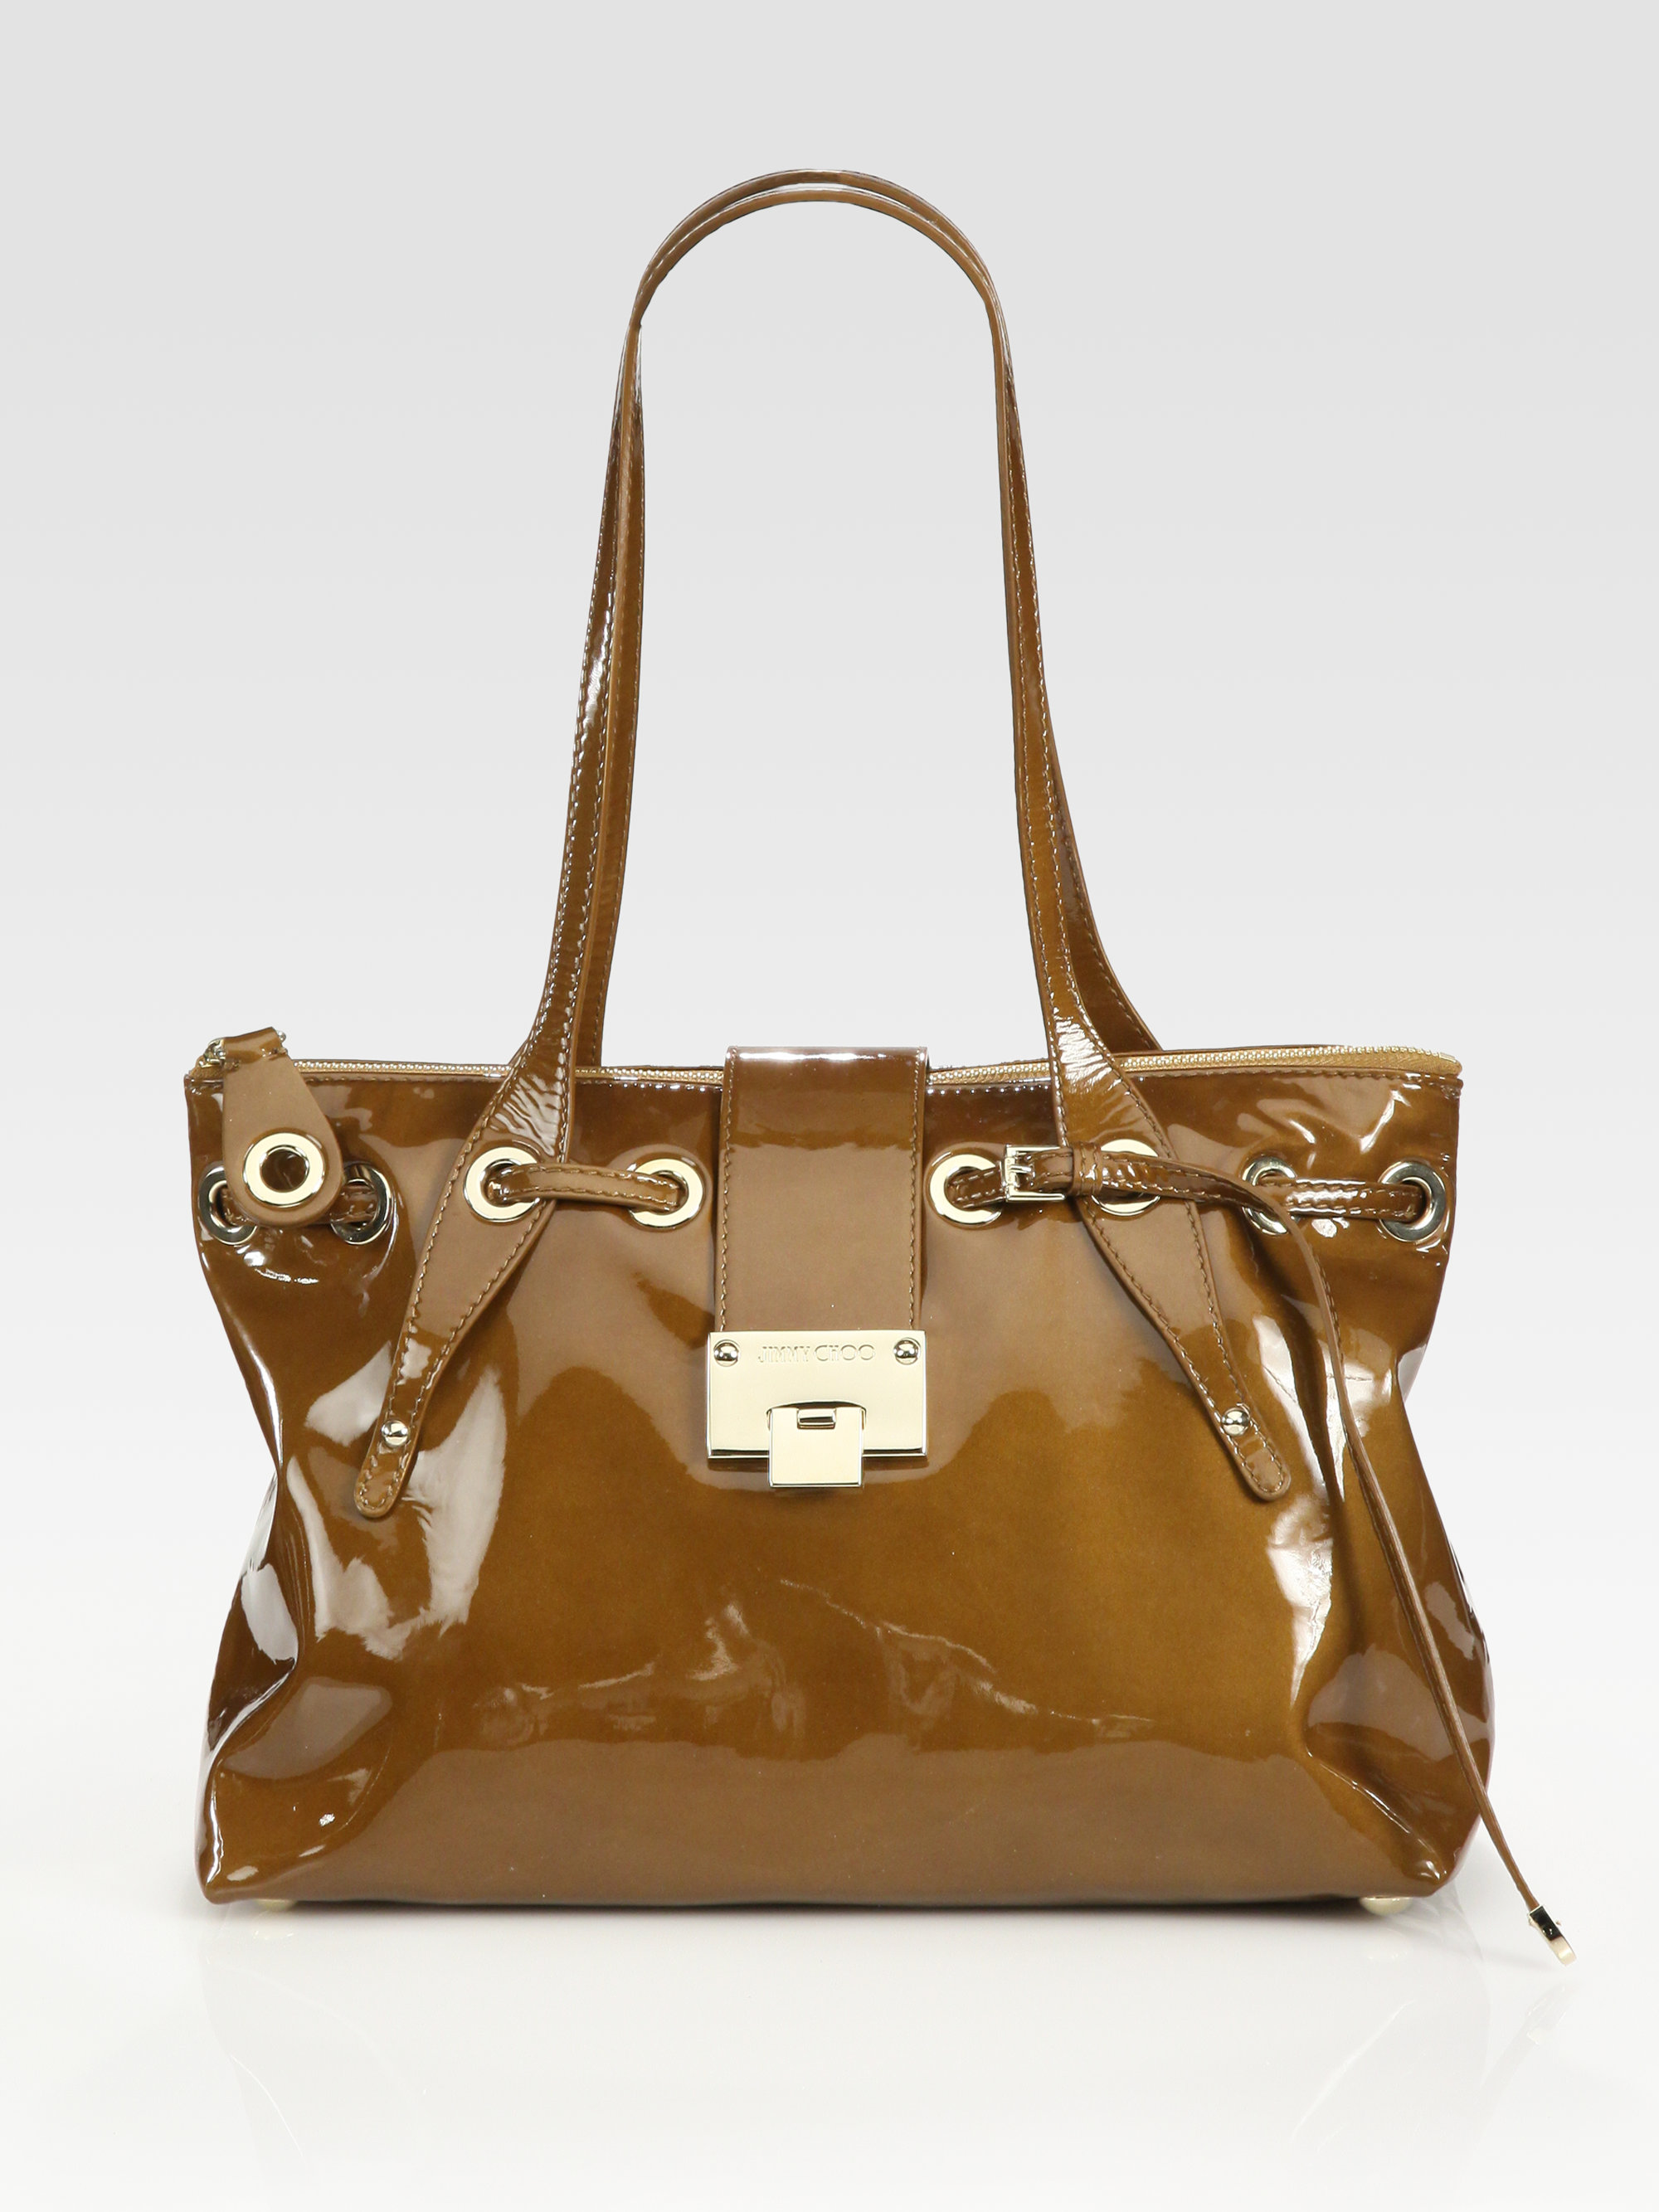 Jimmy Choo Small Patent Leather Tote Bag in Brown (tan) | Lyst